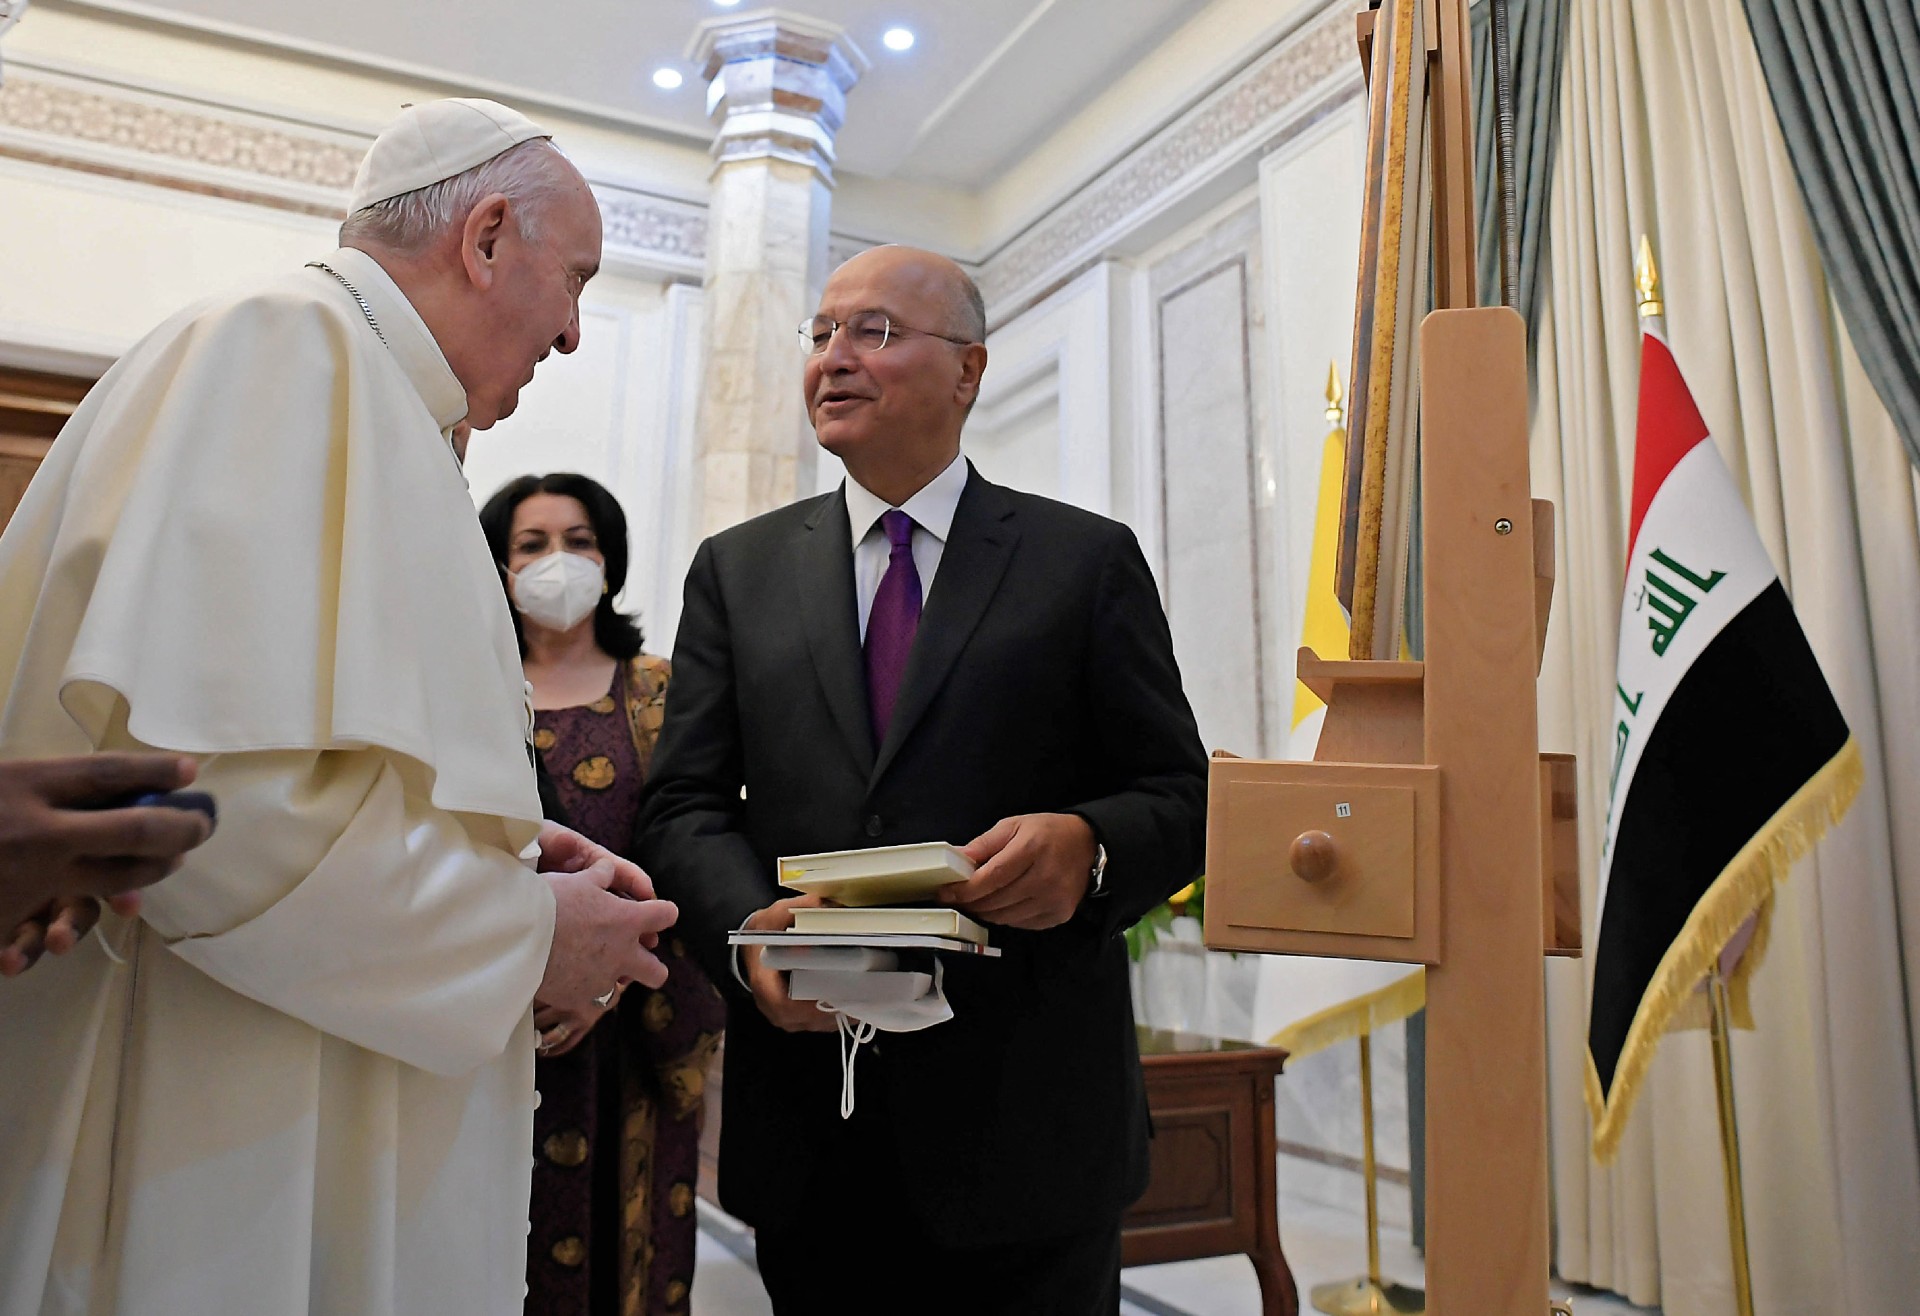 Iraqi President Barham Saleh offering books and other gifts to Pope Francis during his visit to the presidential palace in Baghdad's Green Zone on 5 March (AFP)